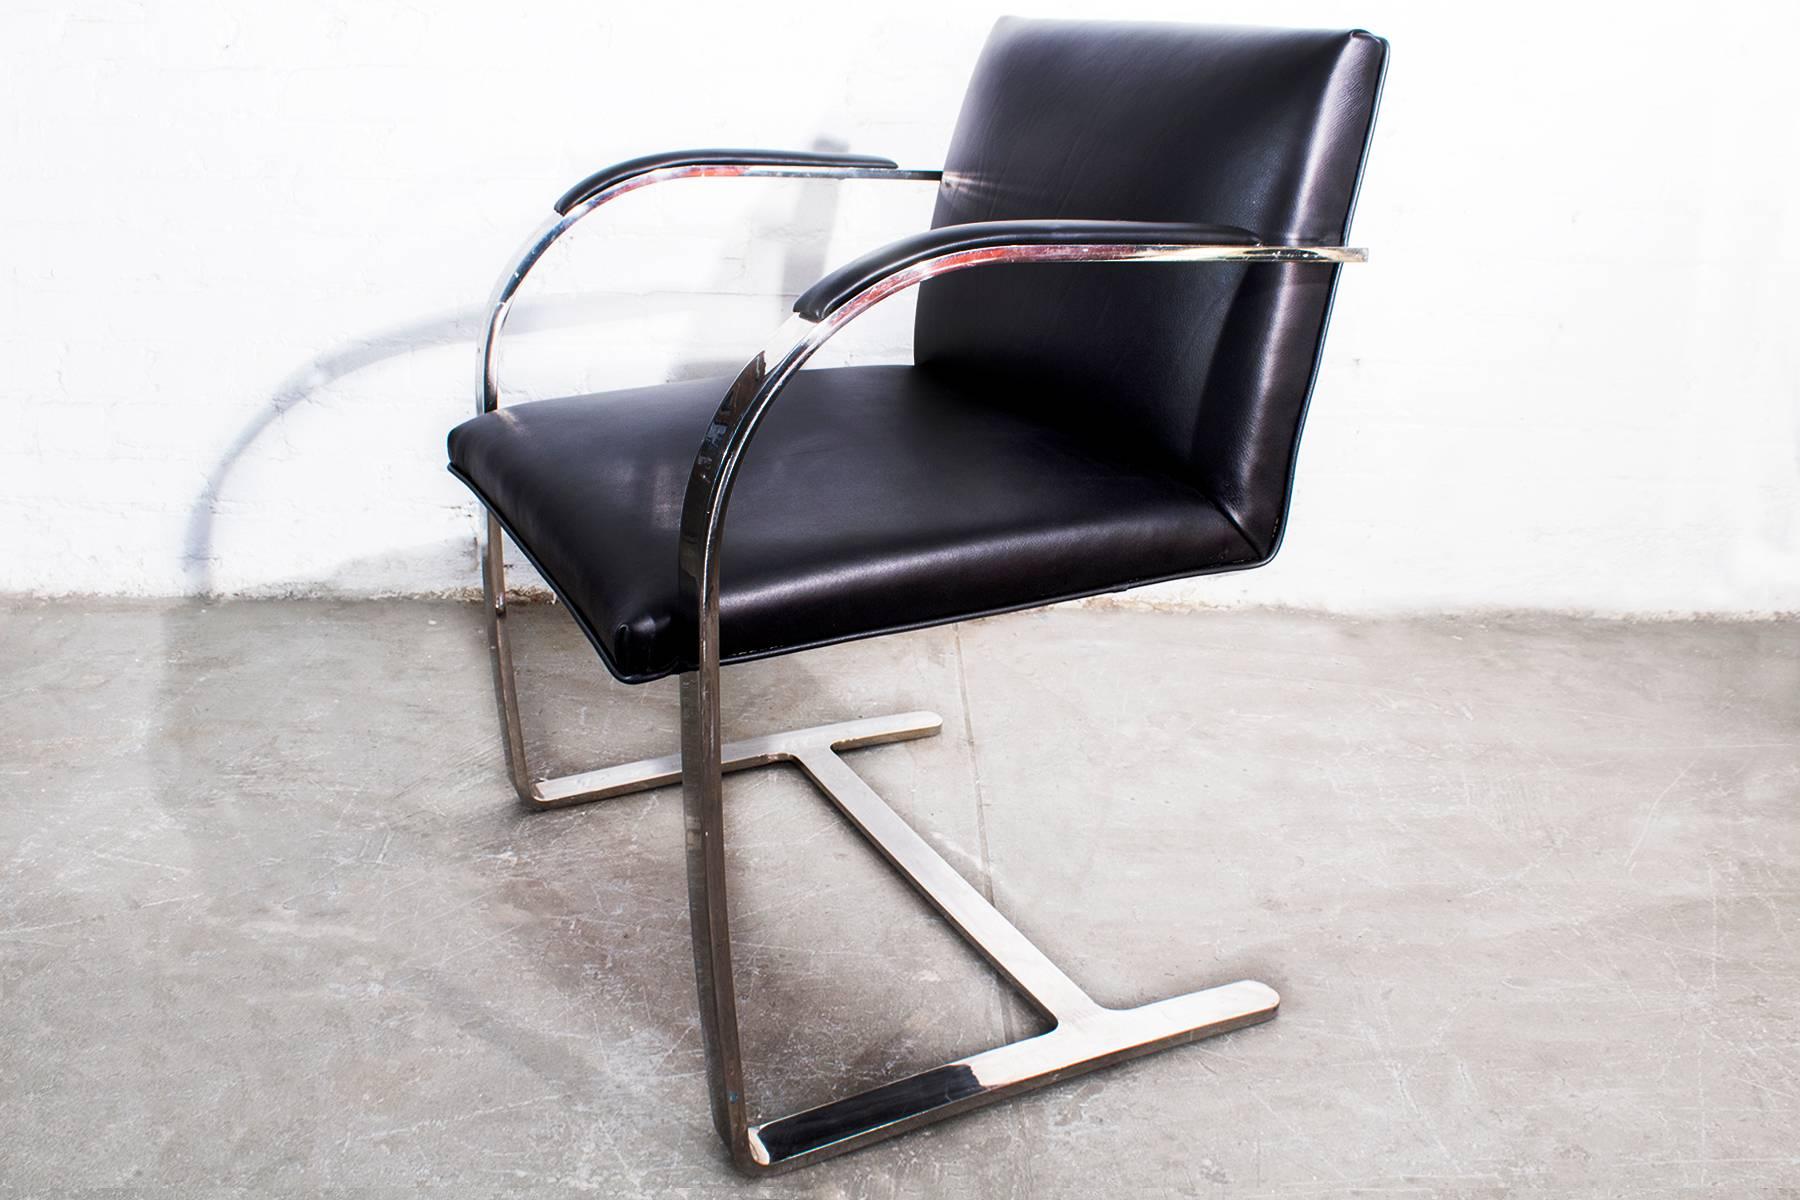 The Classic "Brno Flat Bar" side chair, originally designed by Mies van der Rohe in the 1930s, is renowned for its simplicity. This Classic is celebrated for its iconic form, Minimalist lines and thoughtful use of leather and steel. Newly